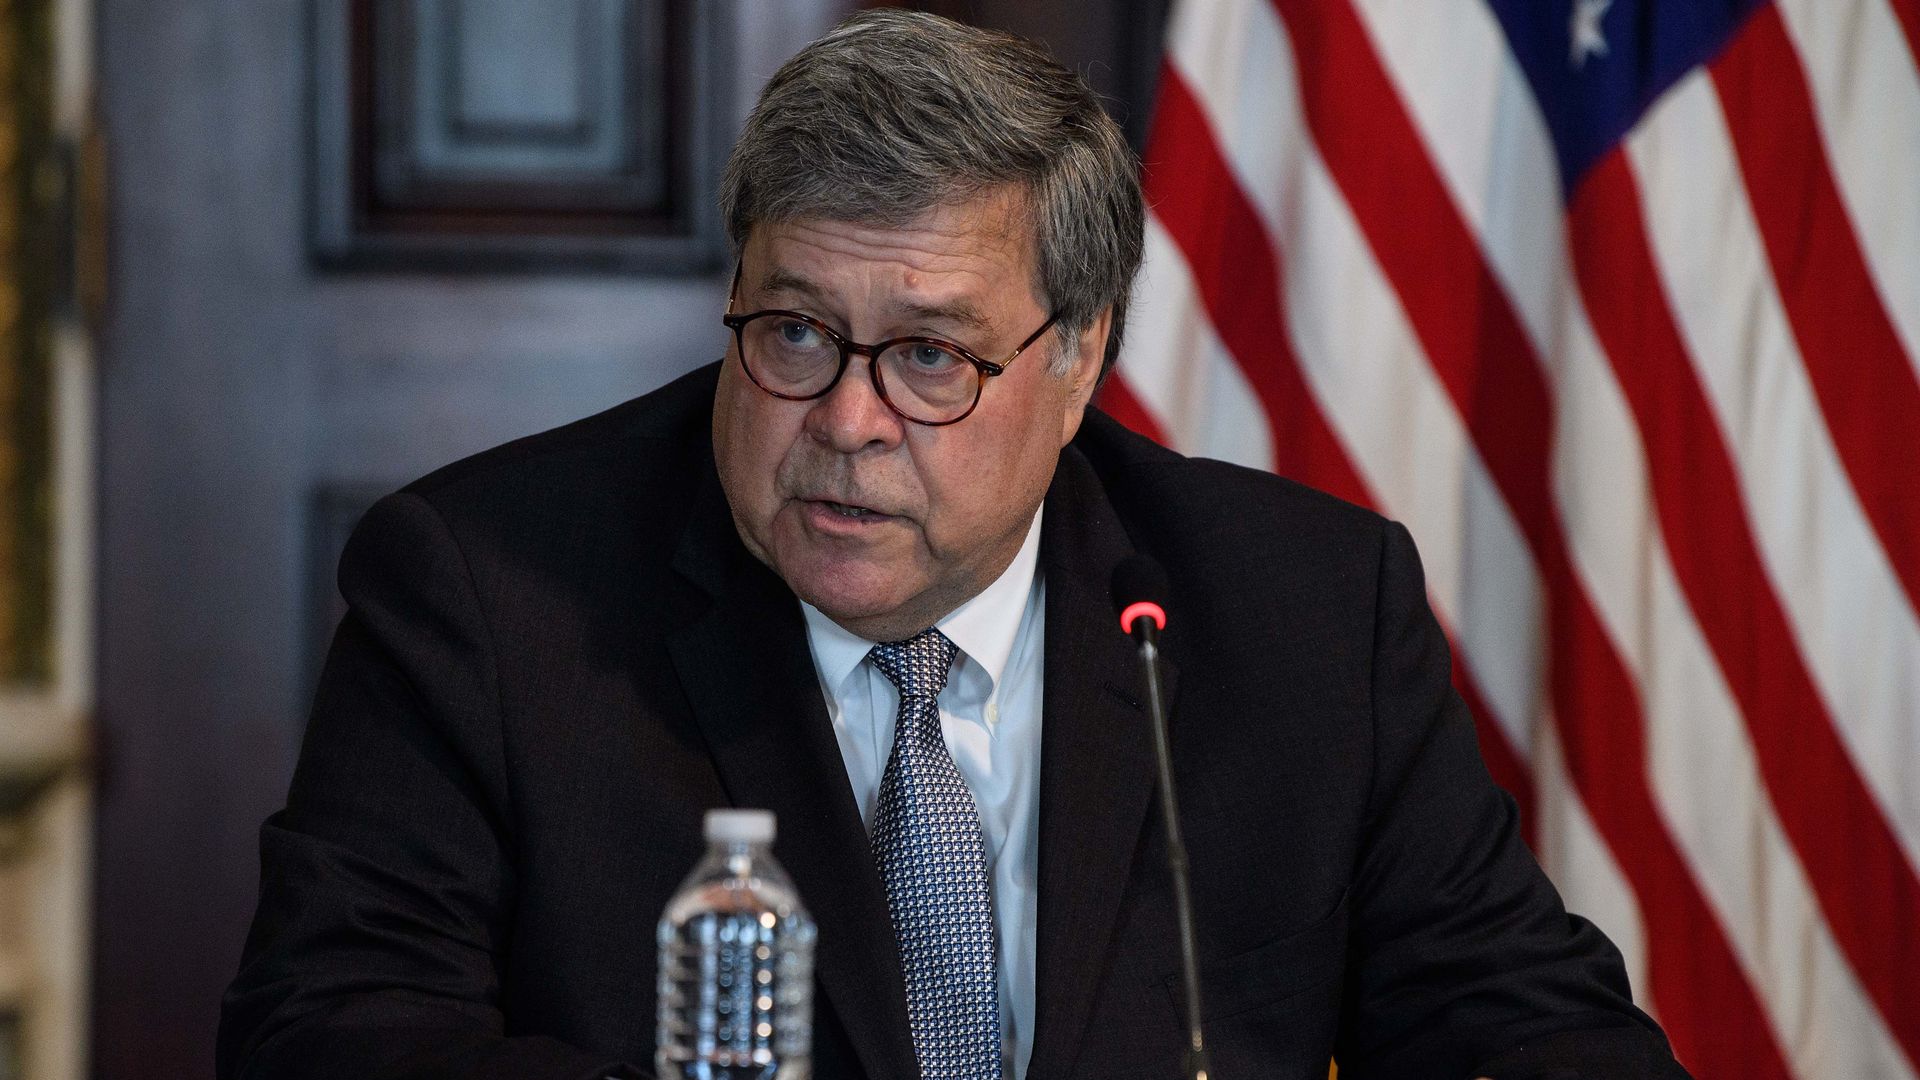 Attorney General Bill Barr speaks into a microphone at a roundtable